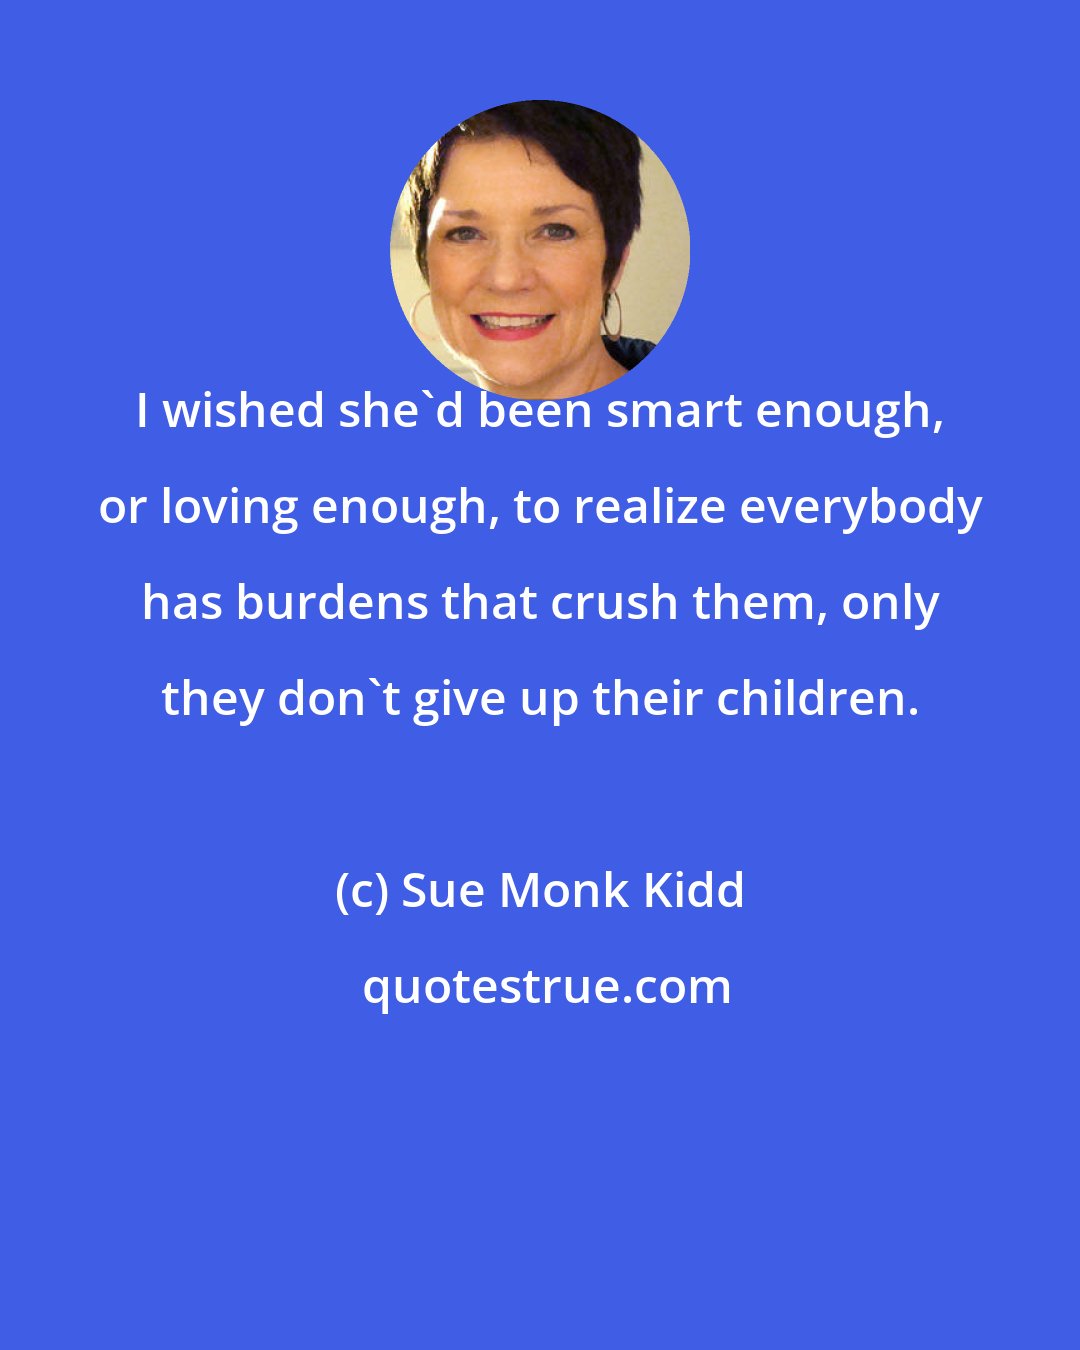 Sue Monk Kidd: I wished she'd been smart enough, or loving enough, to realize everybody has burdens that crush them, only they don't give up their children.